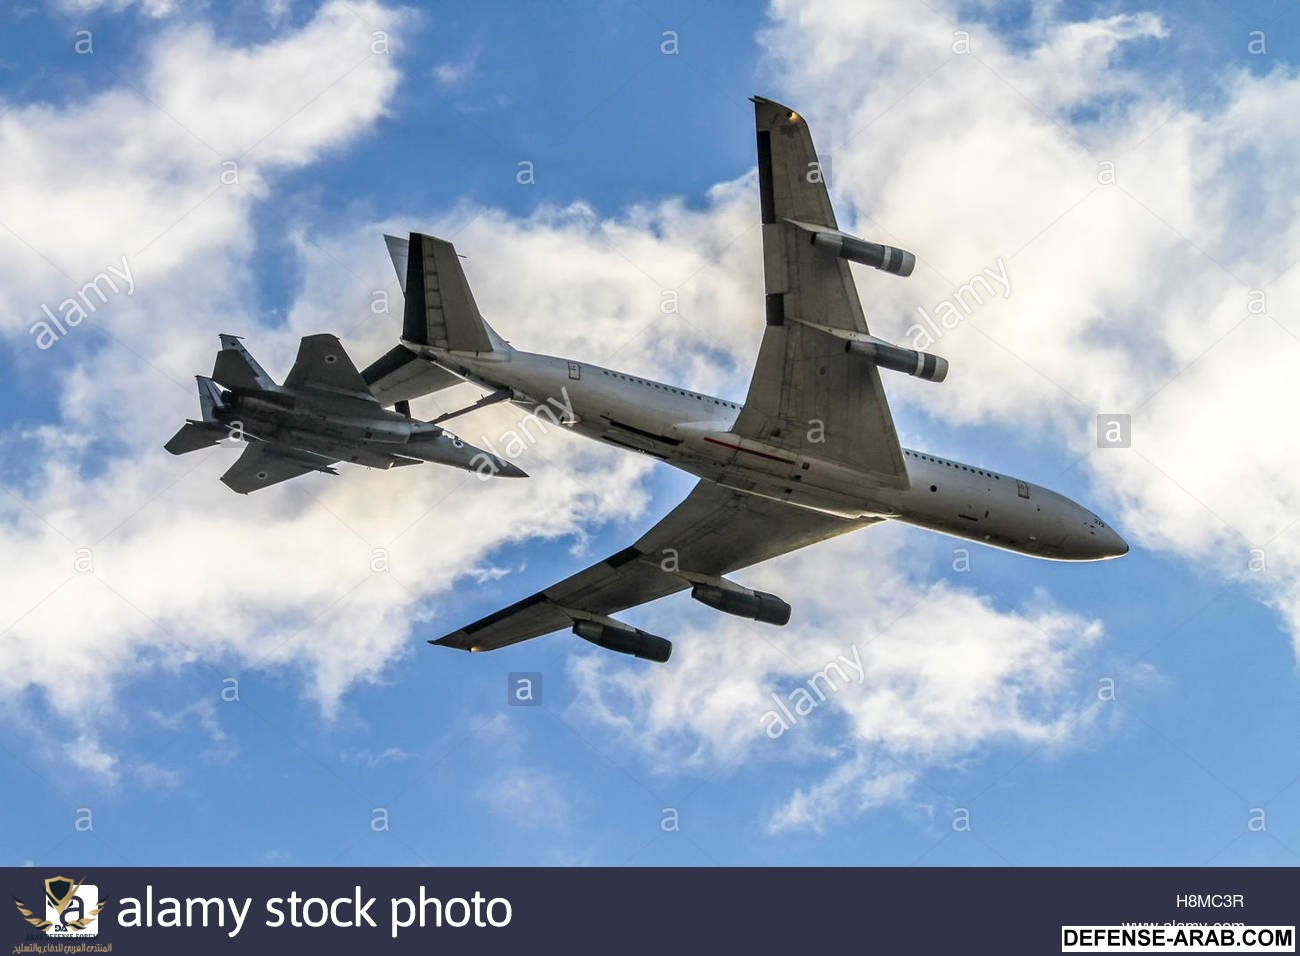 3-israeli-air-force-fighter-jet-f15c-being-refueled-by-a-boeing-707-H8MC3R.jpg